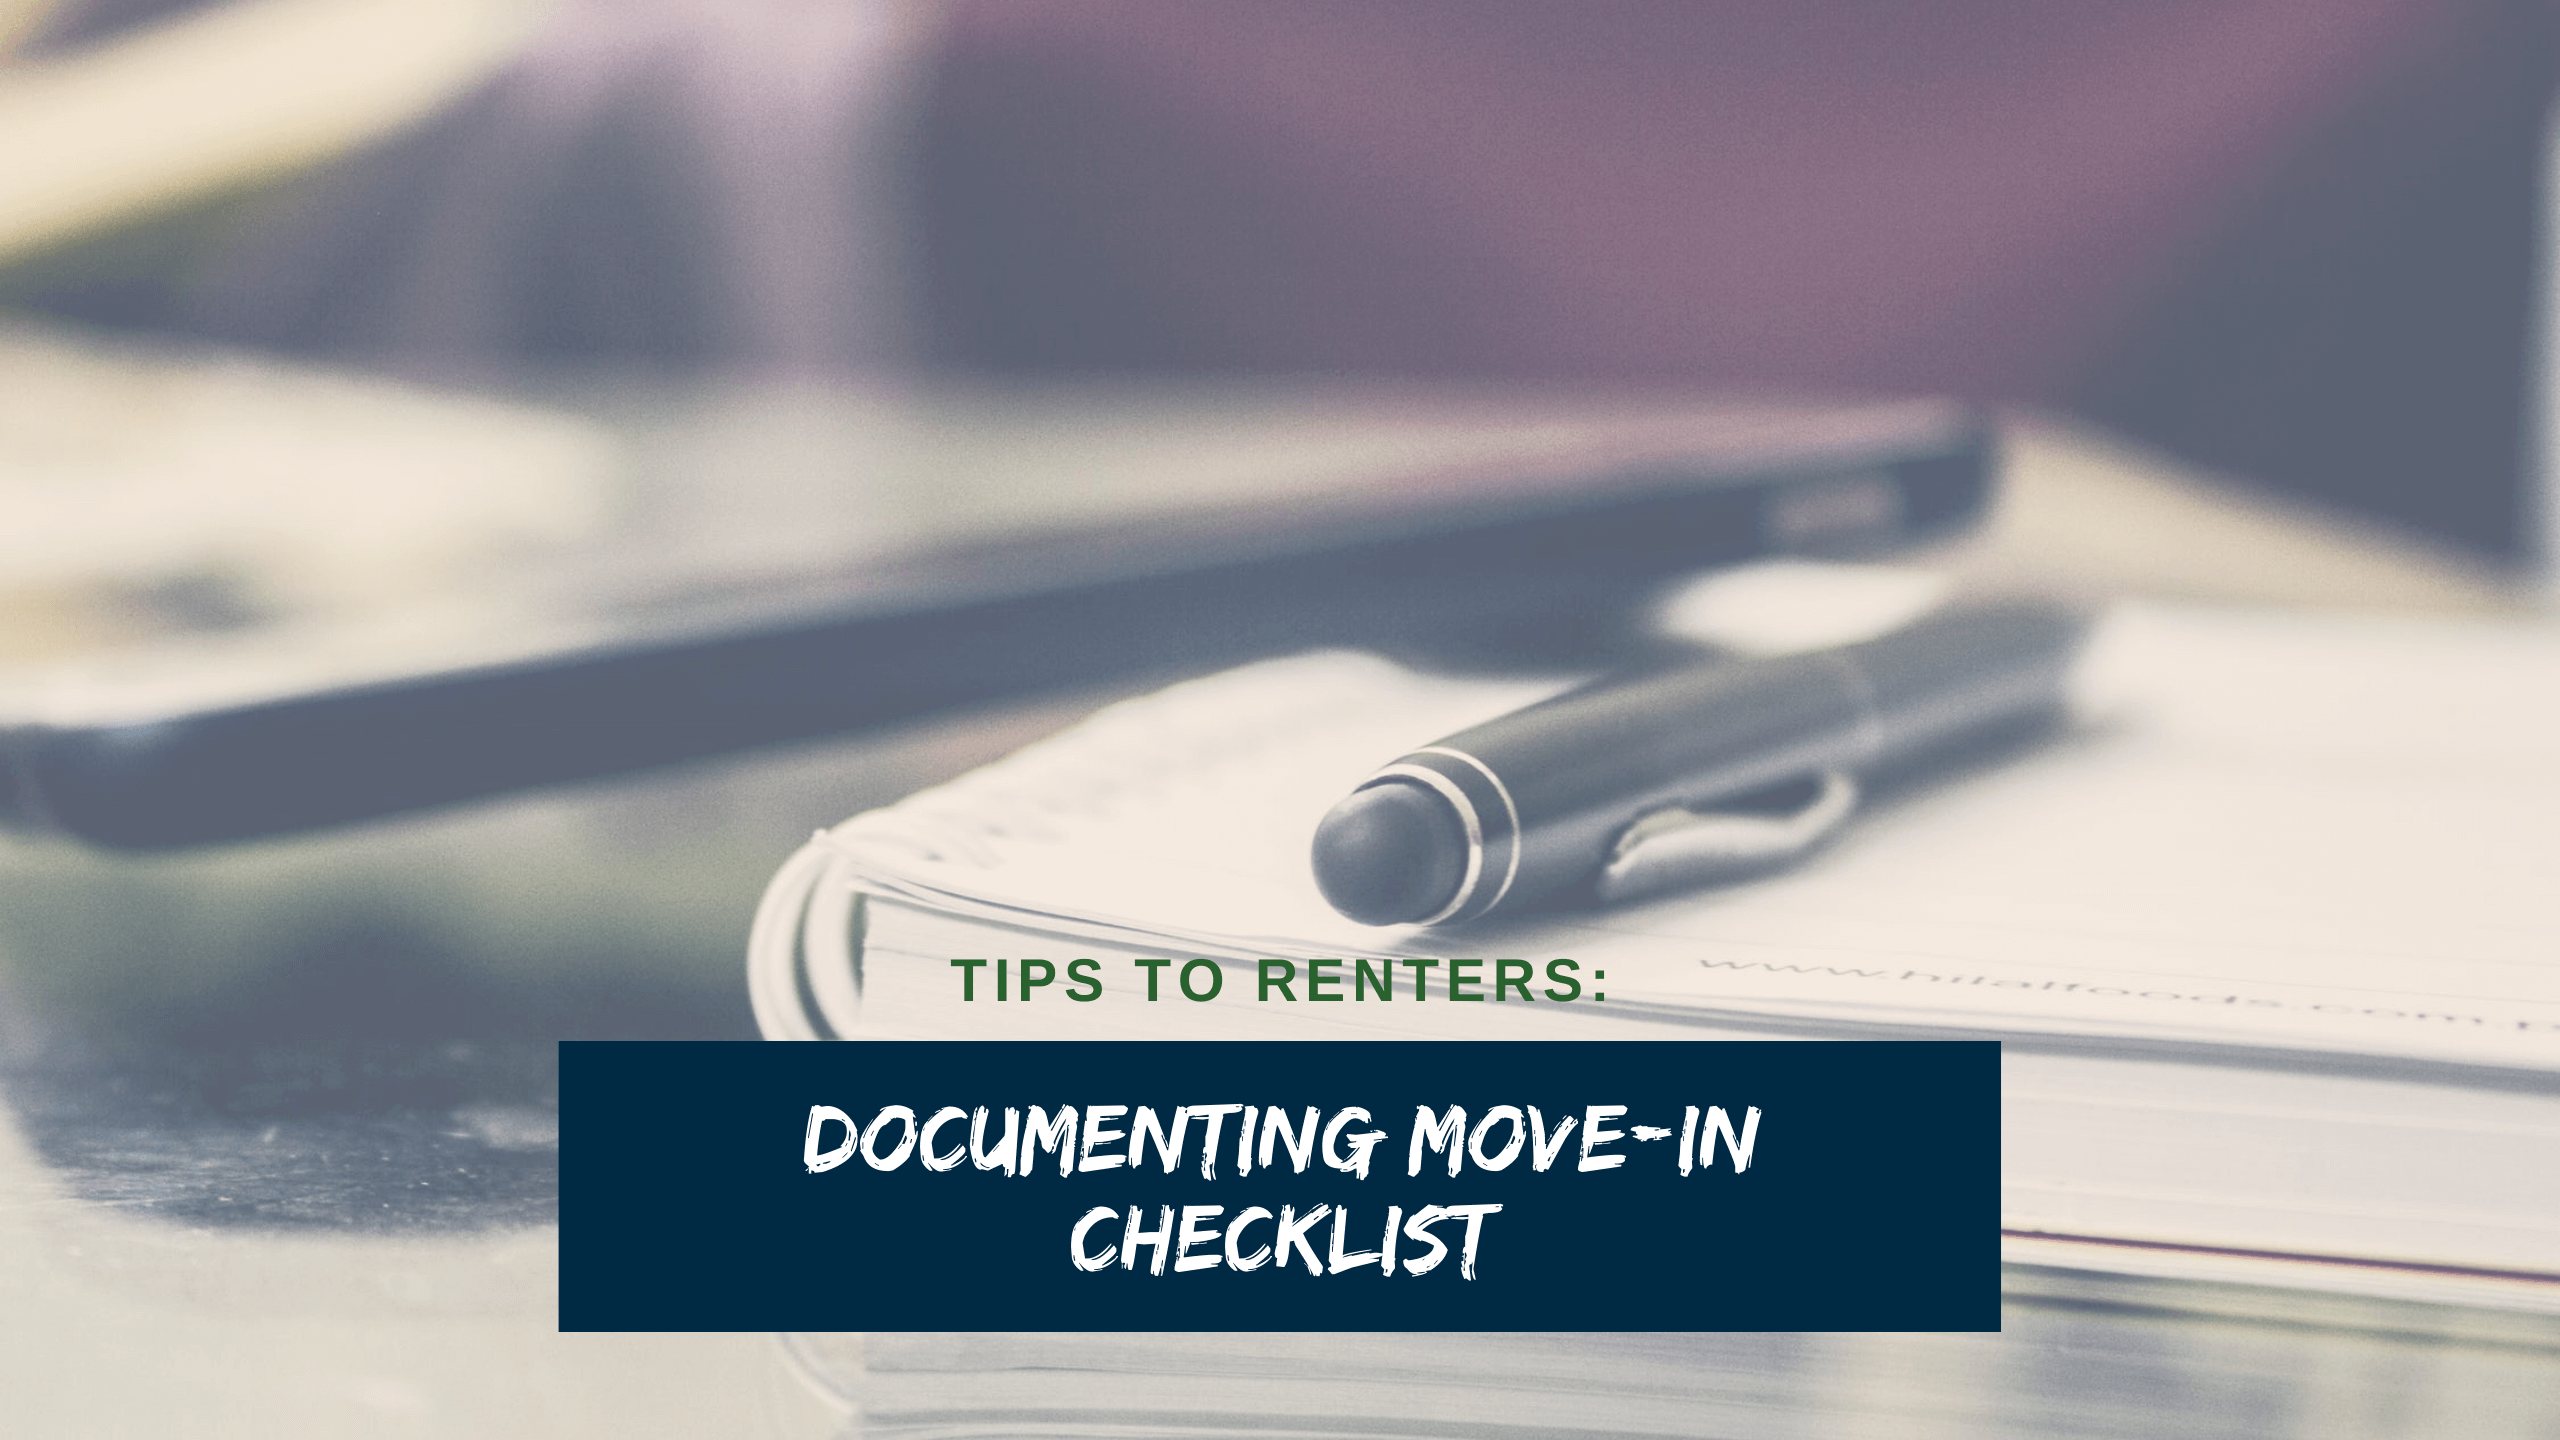 Tips to Colorado Renters for Documenting Their Move-in Checklist